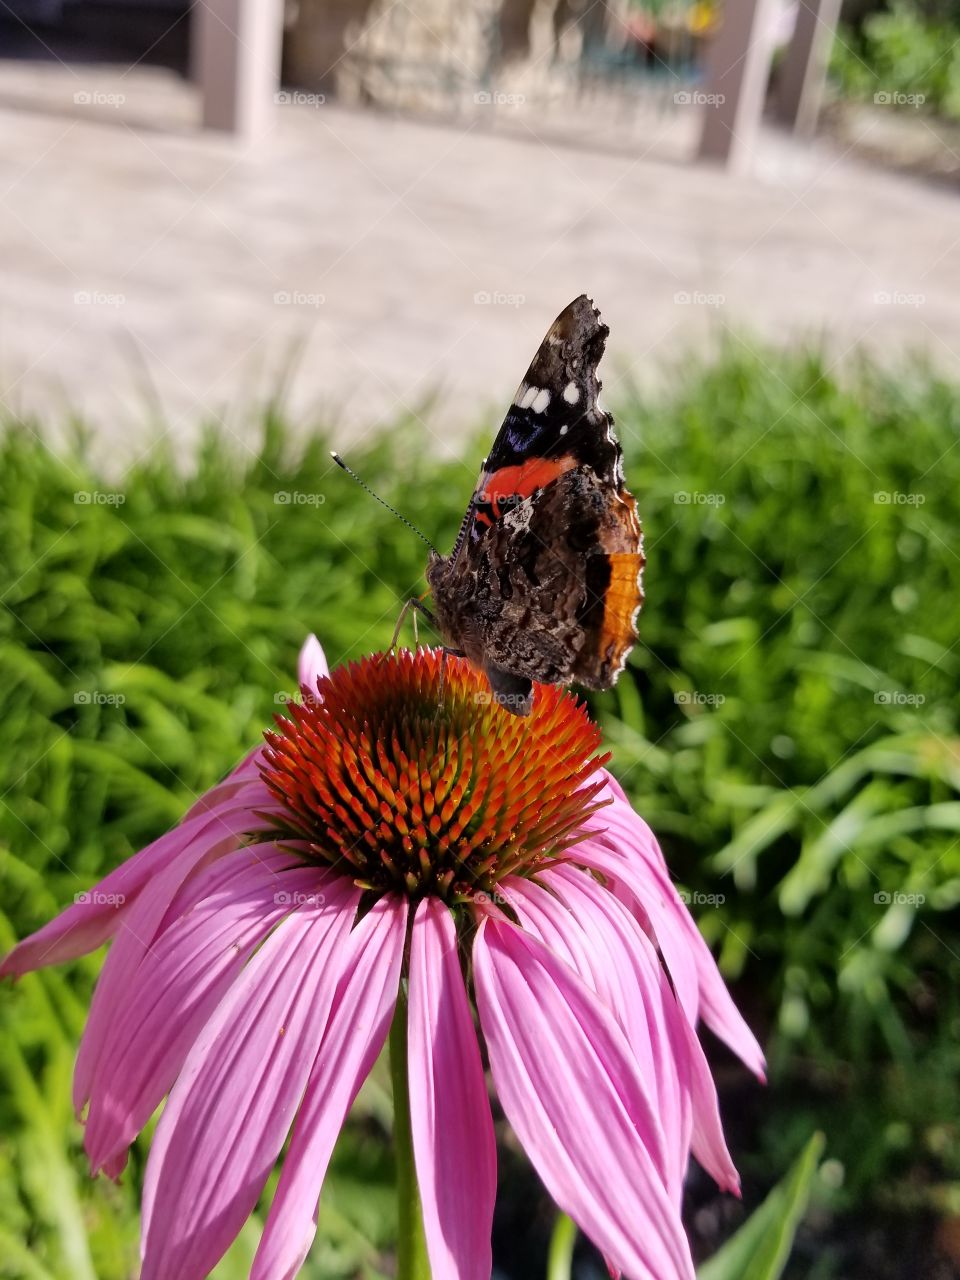 Snacktime for Butterfly